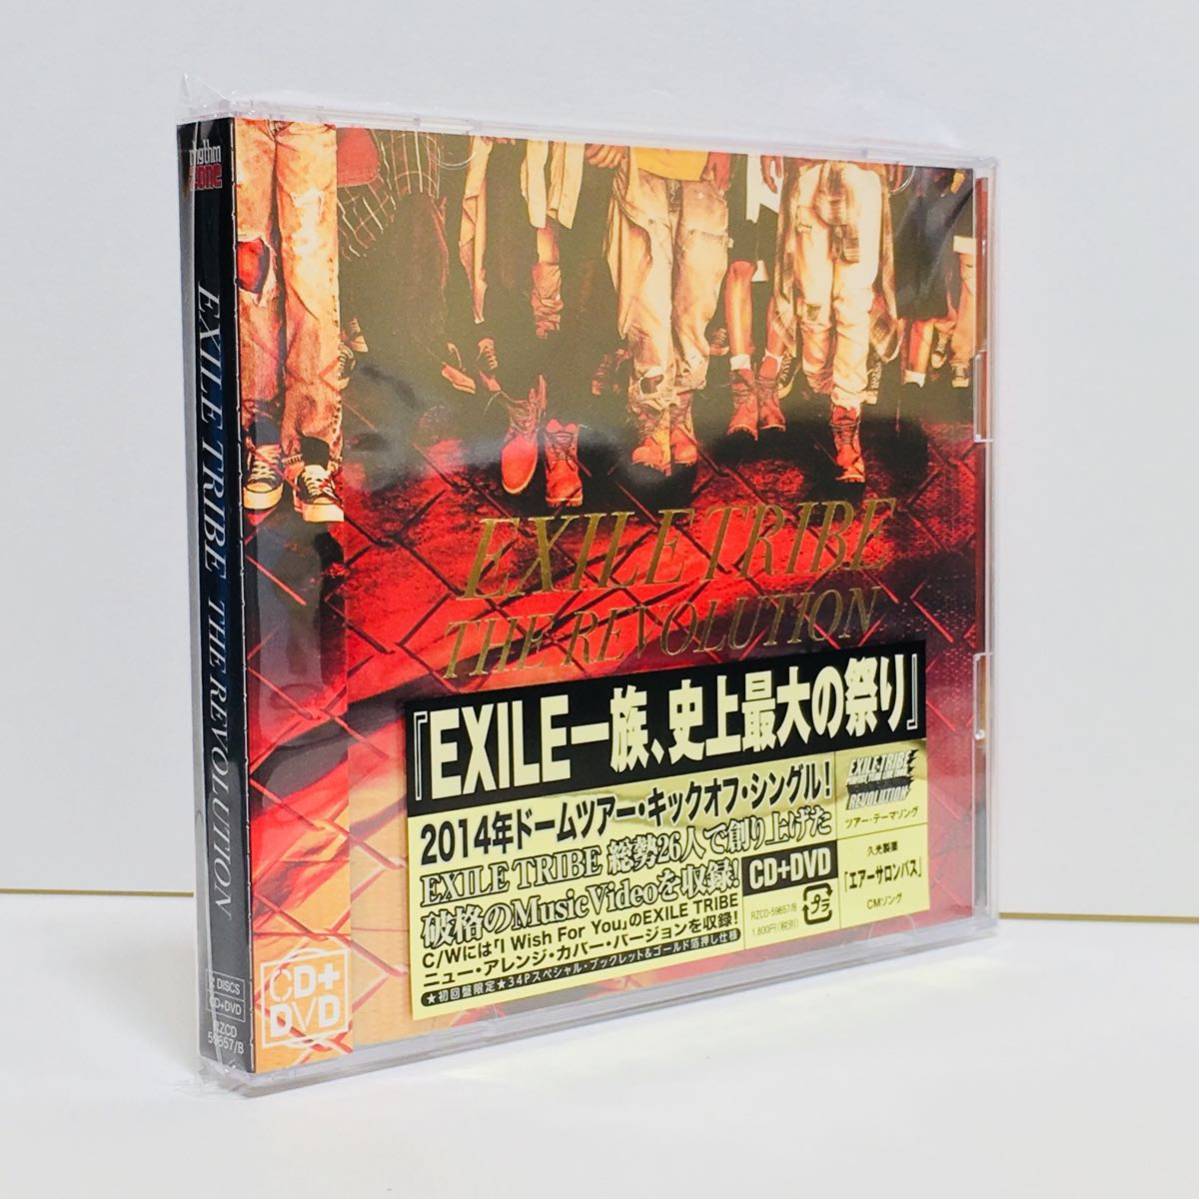 g1/在庫整理品!未開封!新品! /EXILE TRIBE /THE REVOLUTION /I Wish For You /CD＋DVD /ゆうメール送料180円_画像3